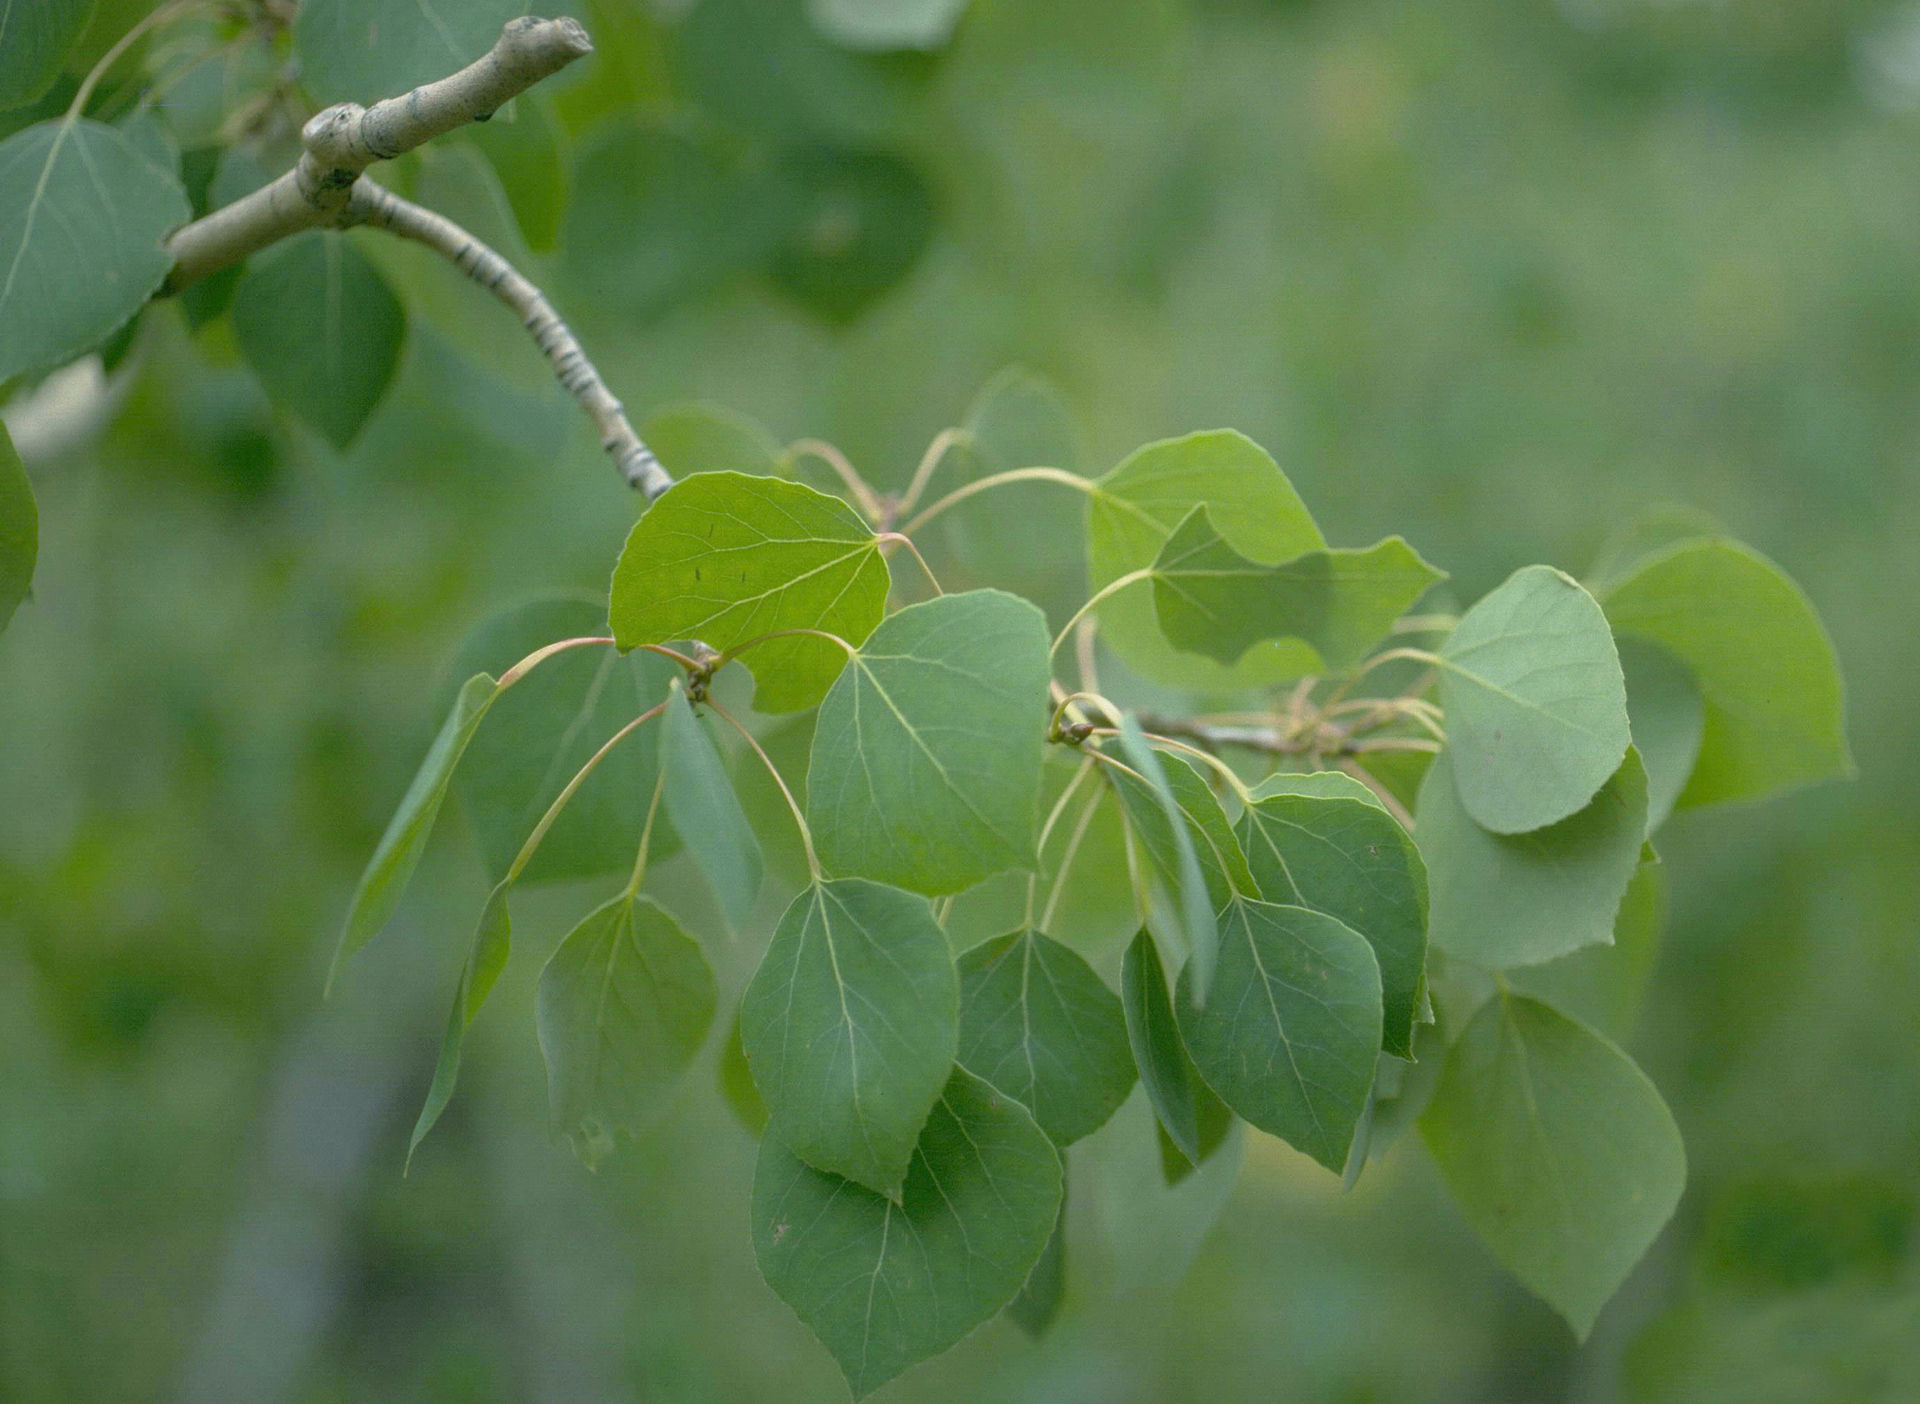 High definition photo of the branch of a tree with tear-shaped bright green leaves